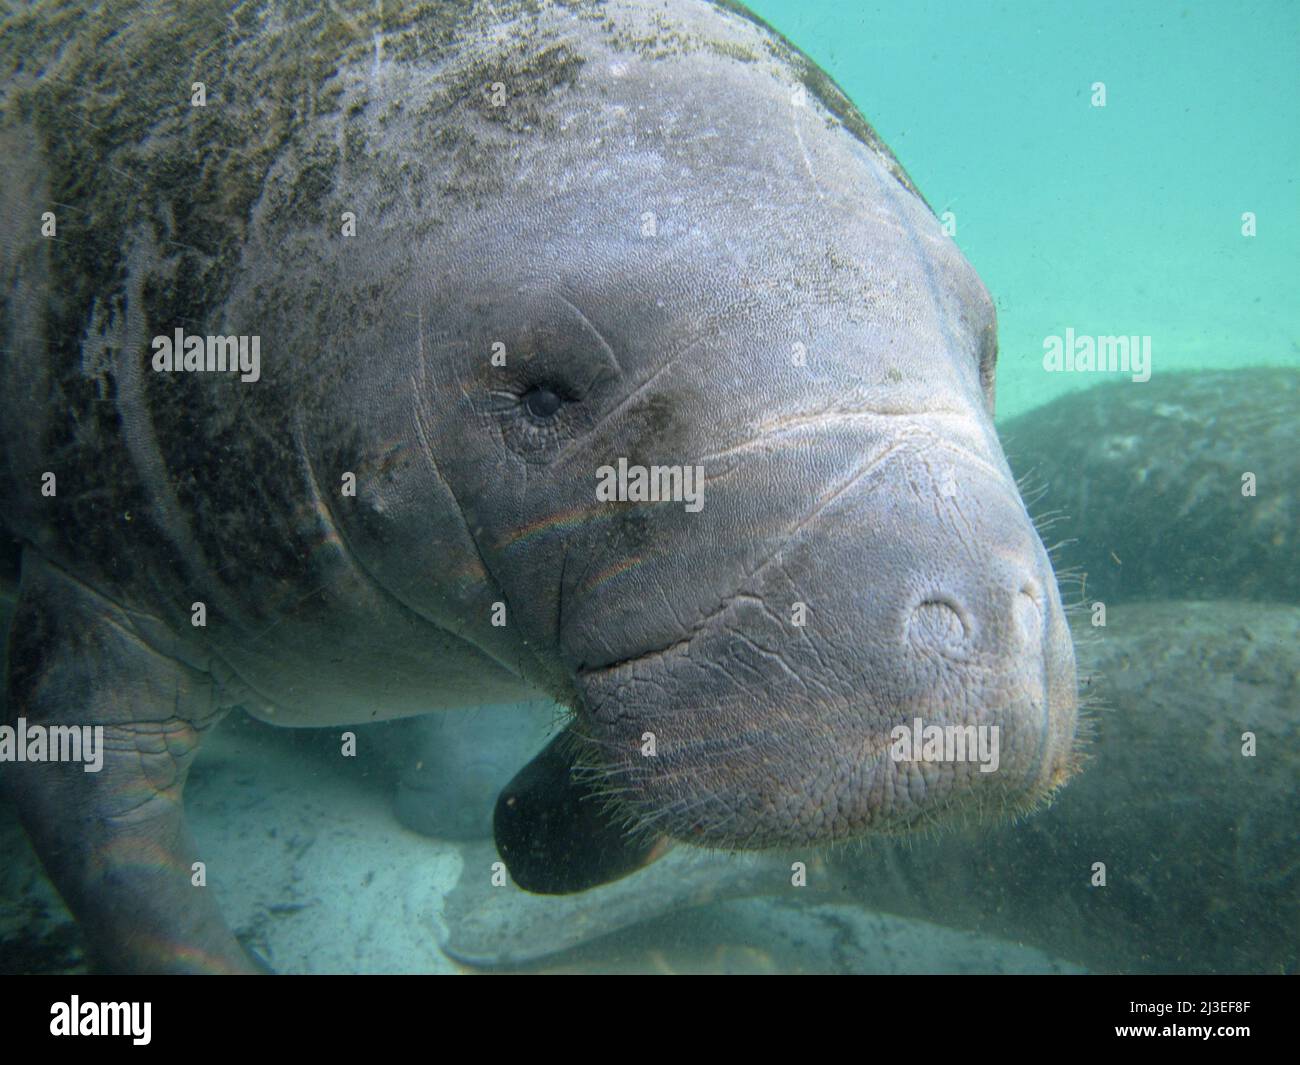 A Florida manatee, also known as a sea cow swims underwater in Florida Keys National Marine Sanctuary, in Key Largo, Florida. Stock Photo